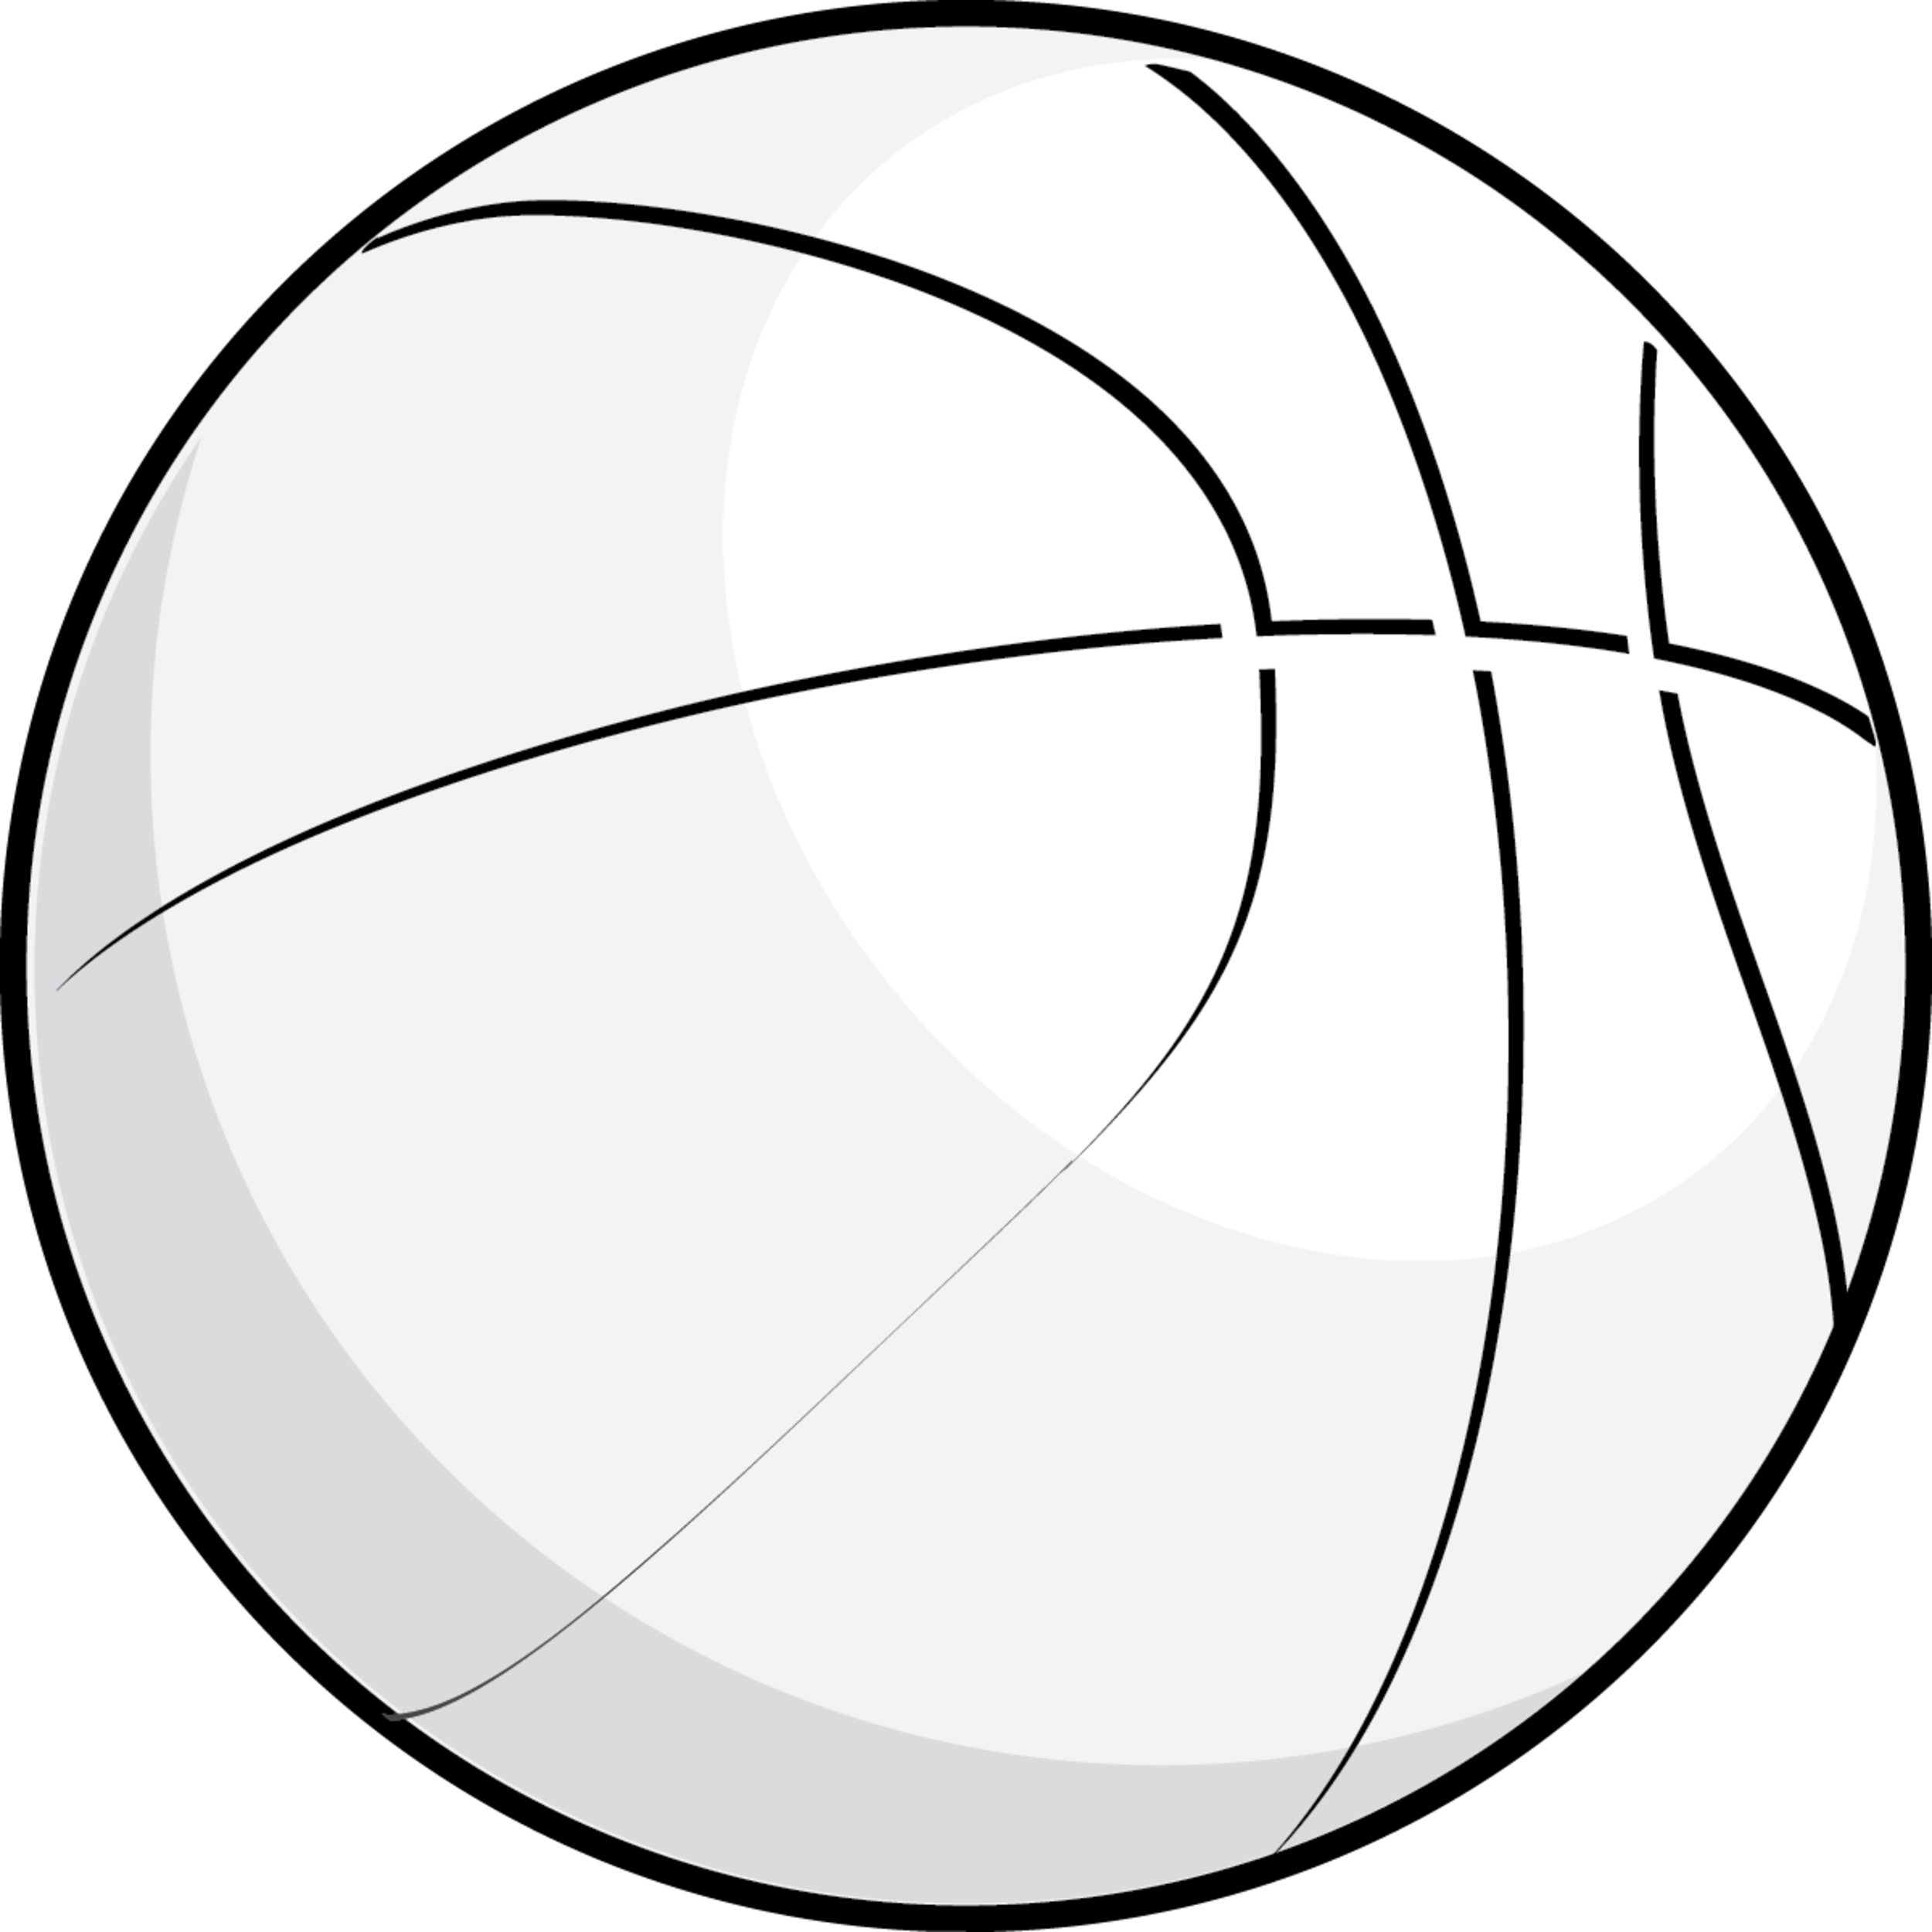 Basketball black and white basketball clipart black and white ...